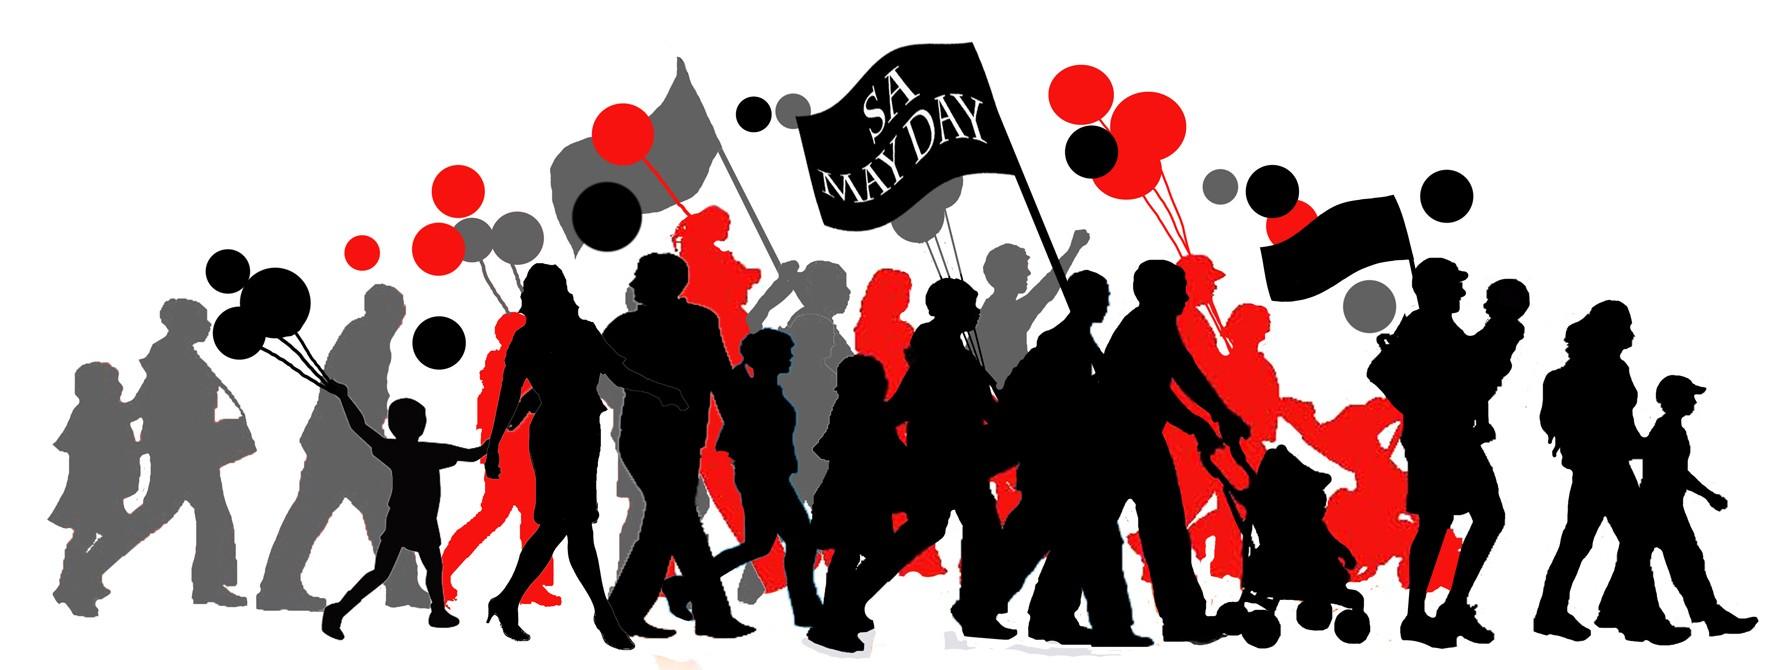 May Day 2019 Image, Picture, Photo, Wallpaper